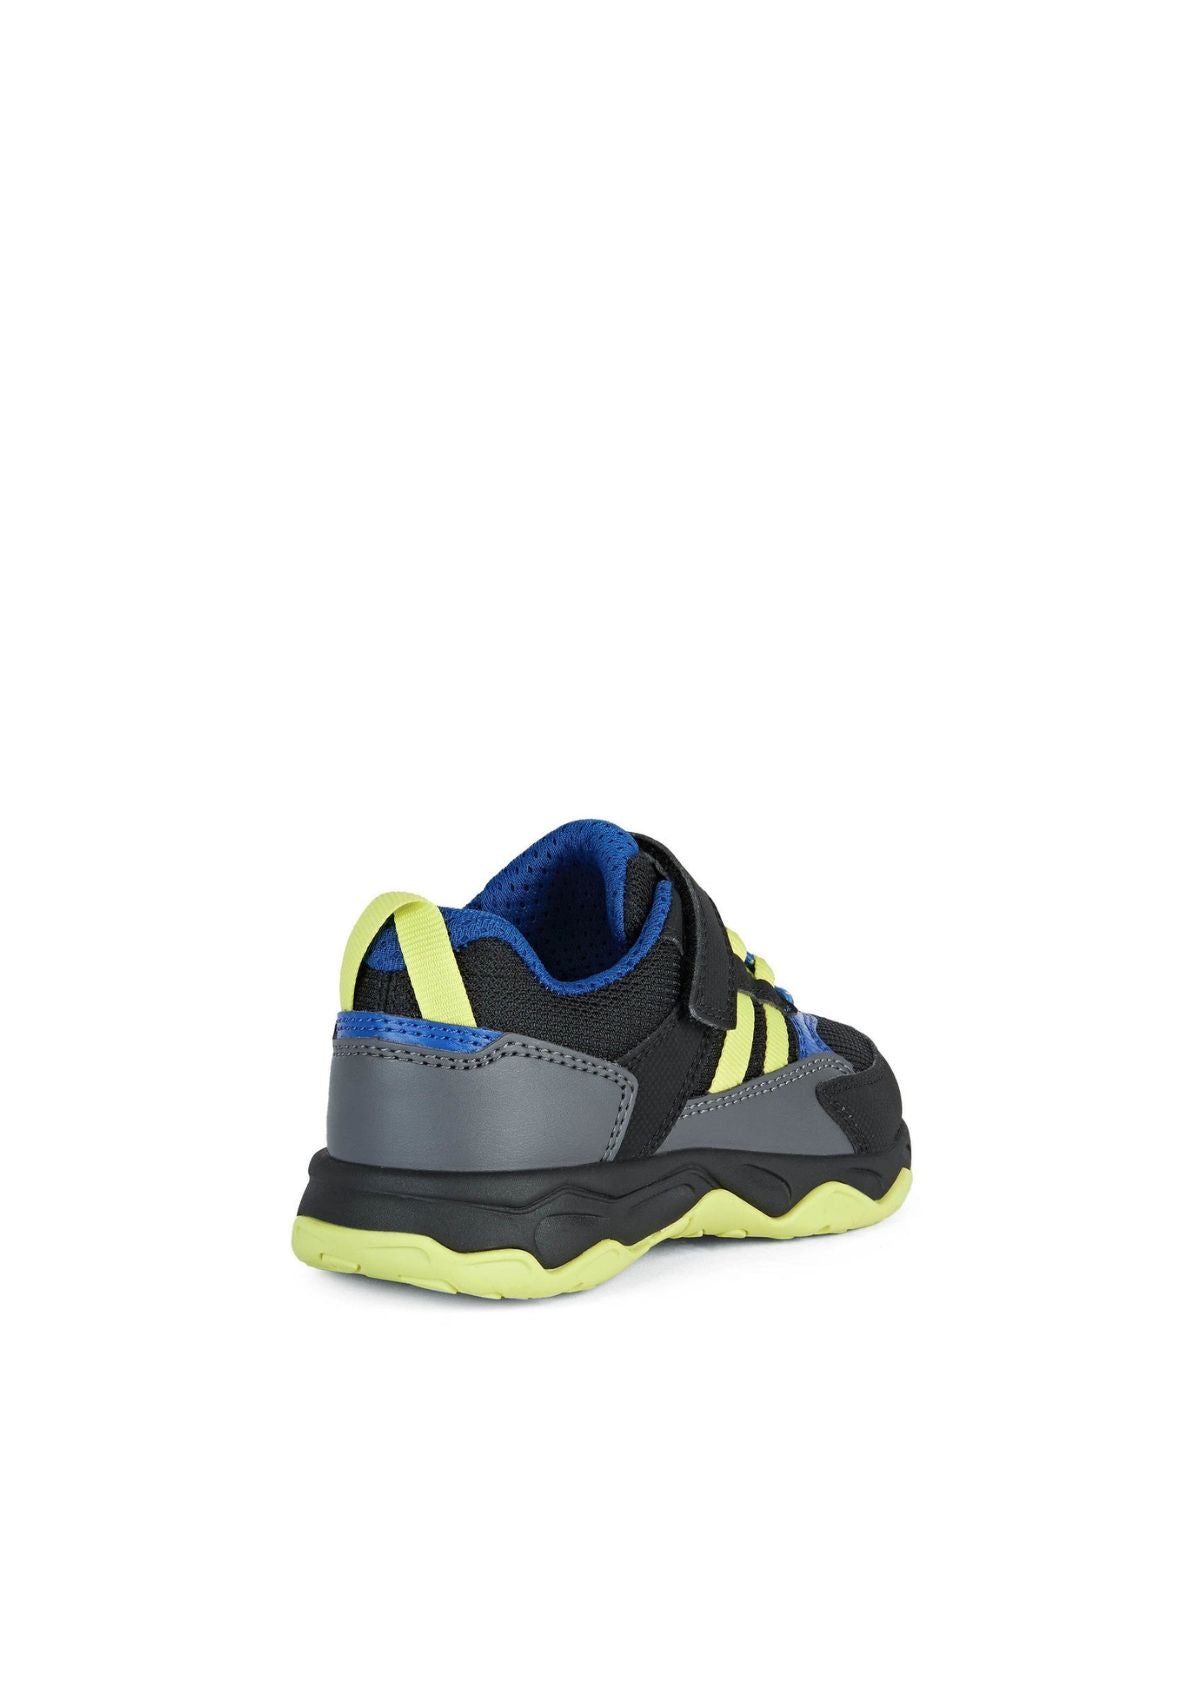 Geox Boys CALCO Trainers Black Lime  side back